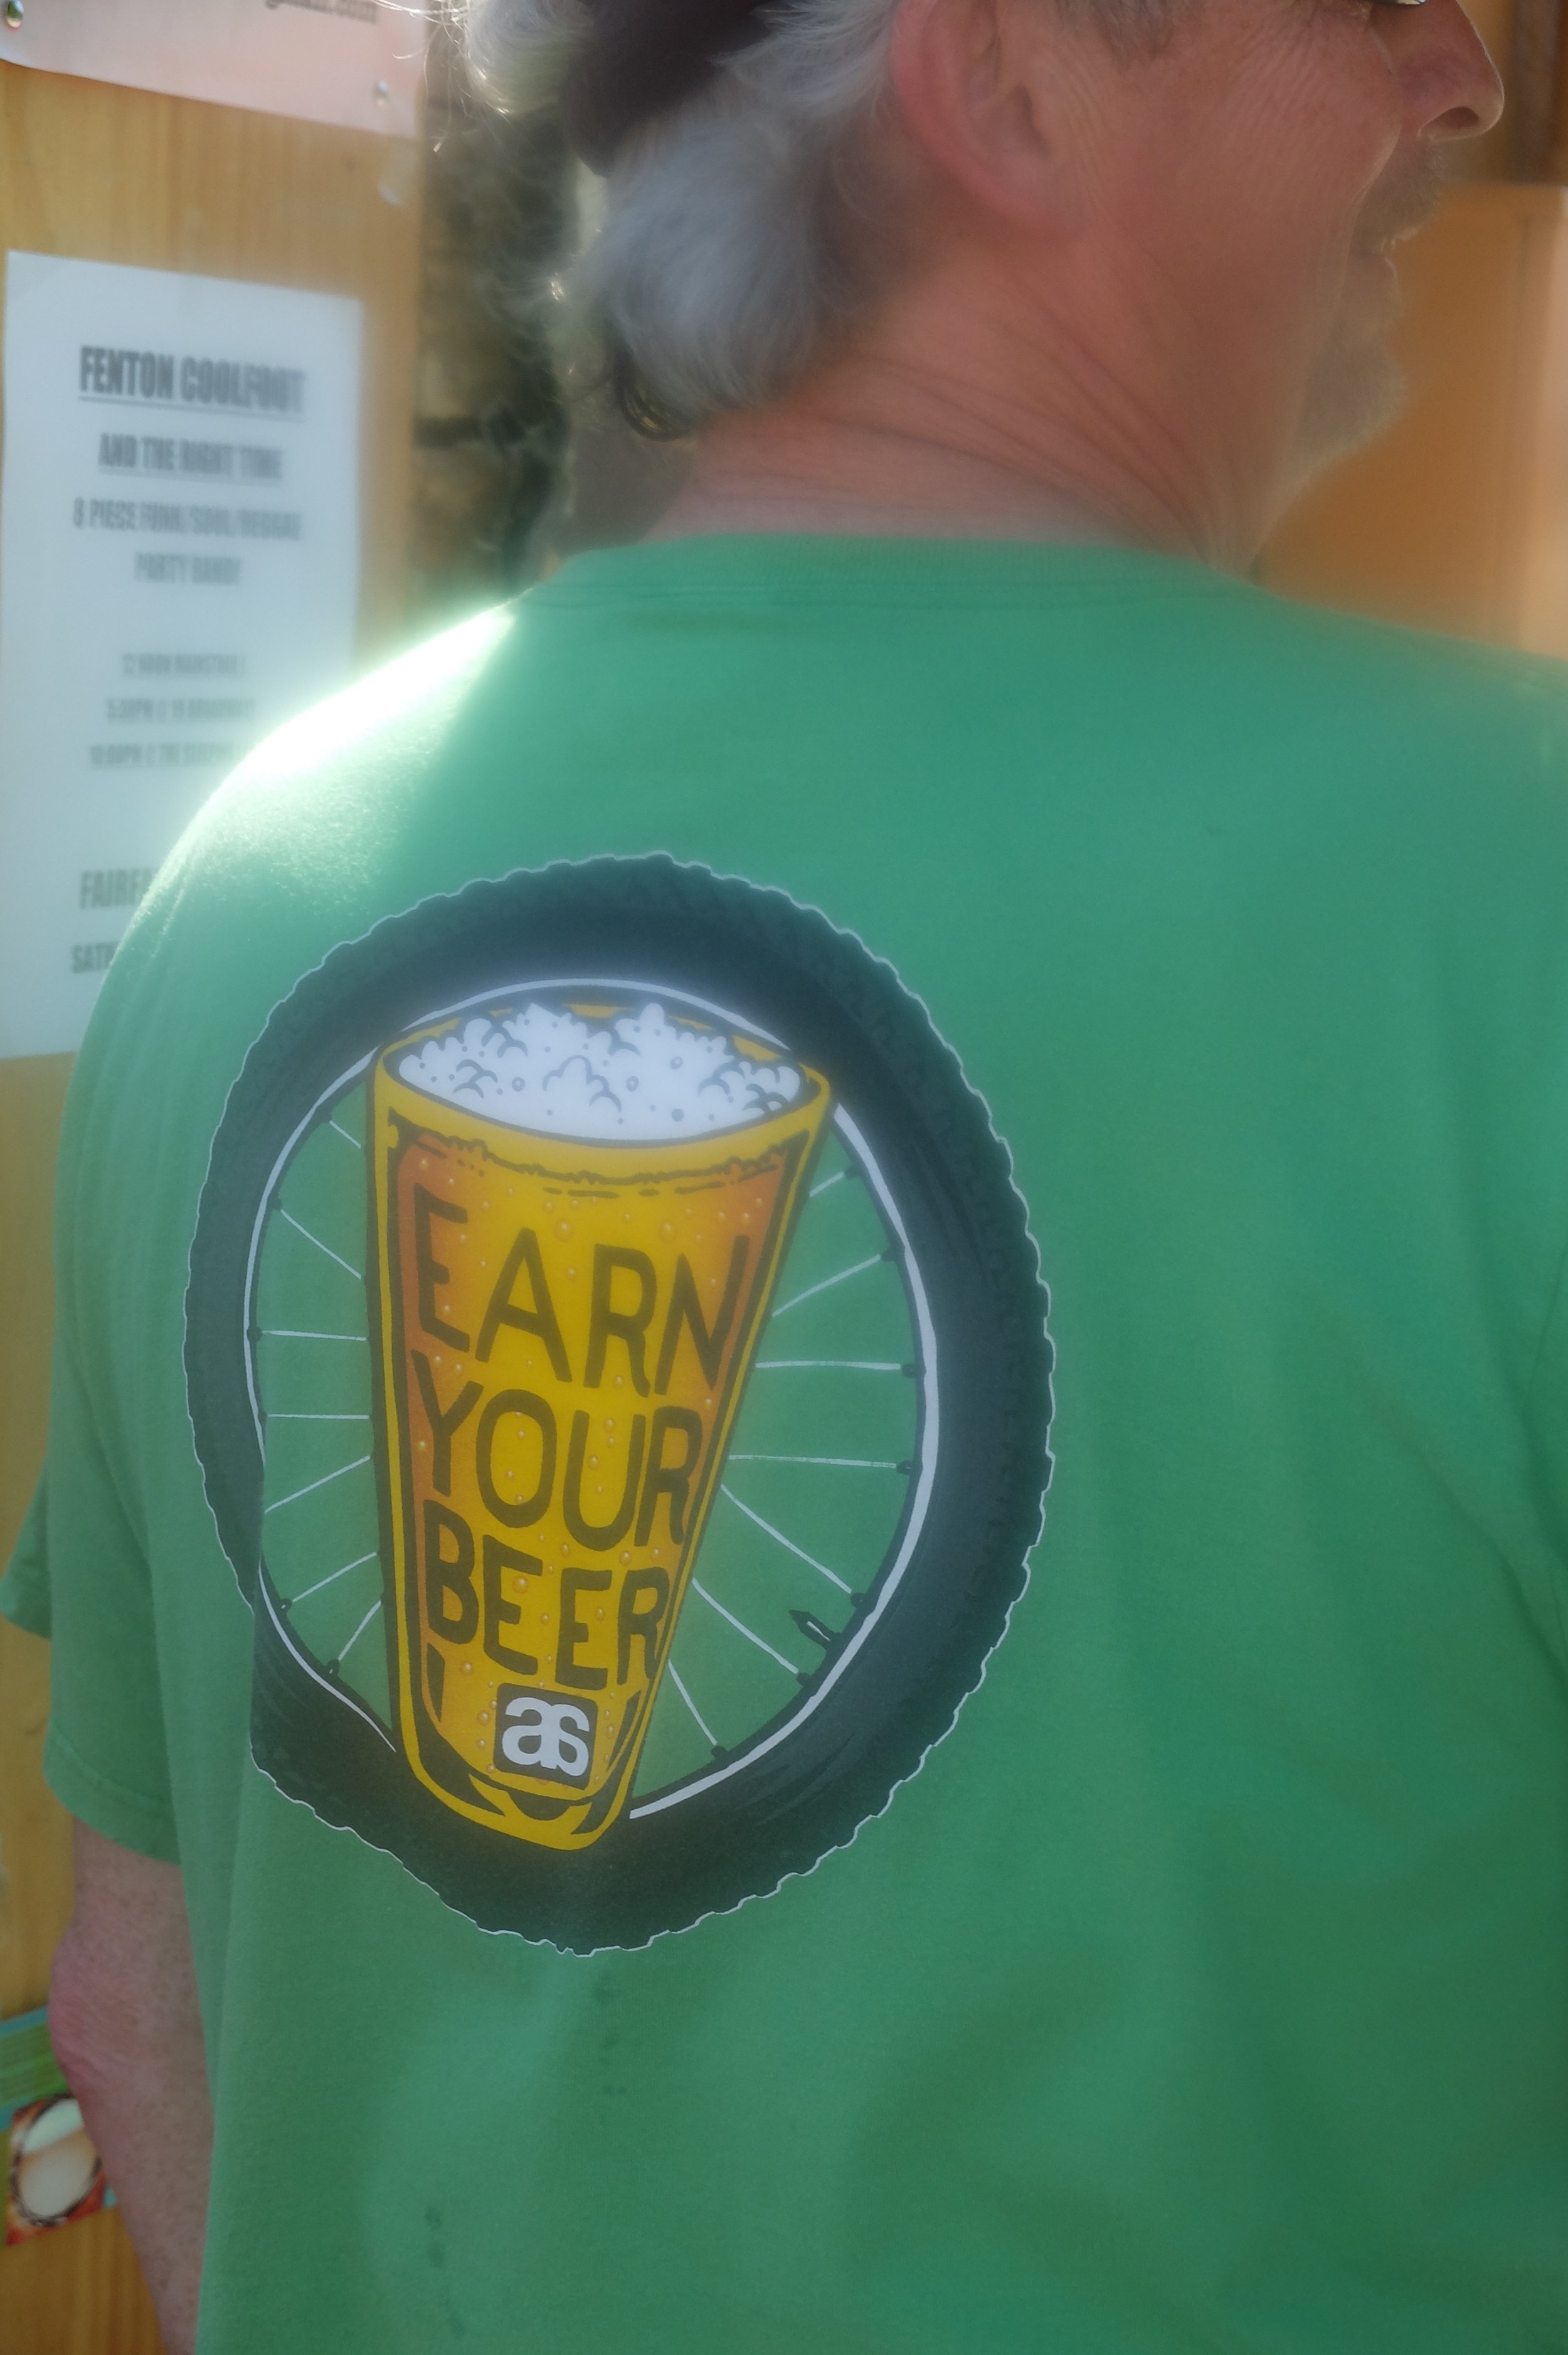  Gestalt Haus, Fairfax, CA.  Then there’s beer-inspired apparel. 